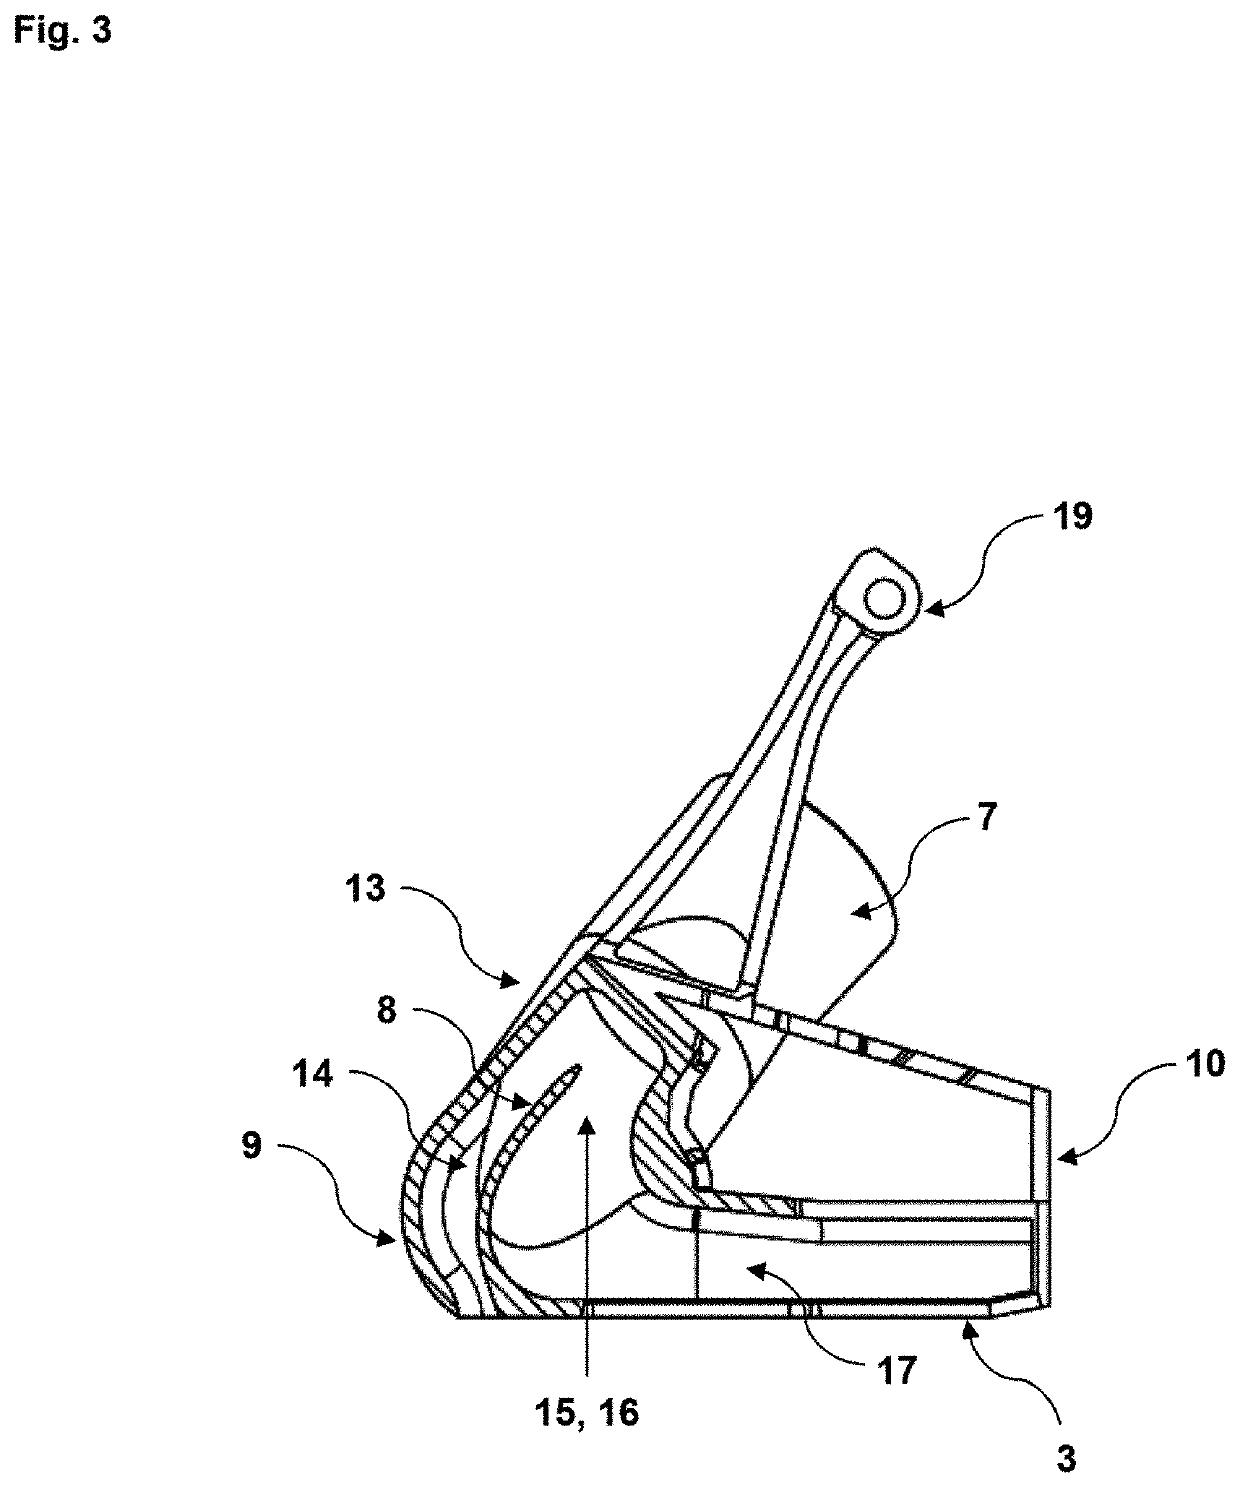 Dust hood device for a power tool and the use thereof, and method for dust collection